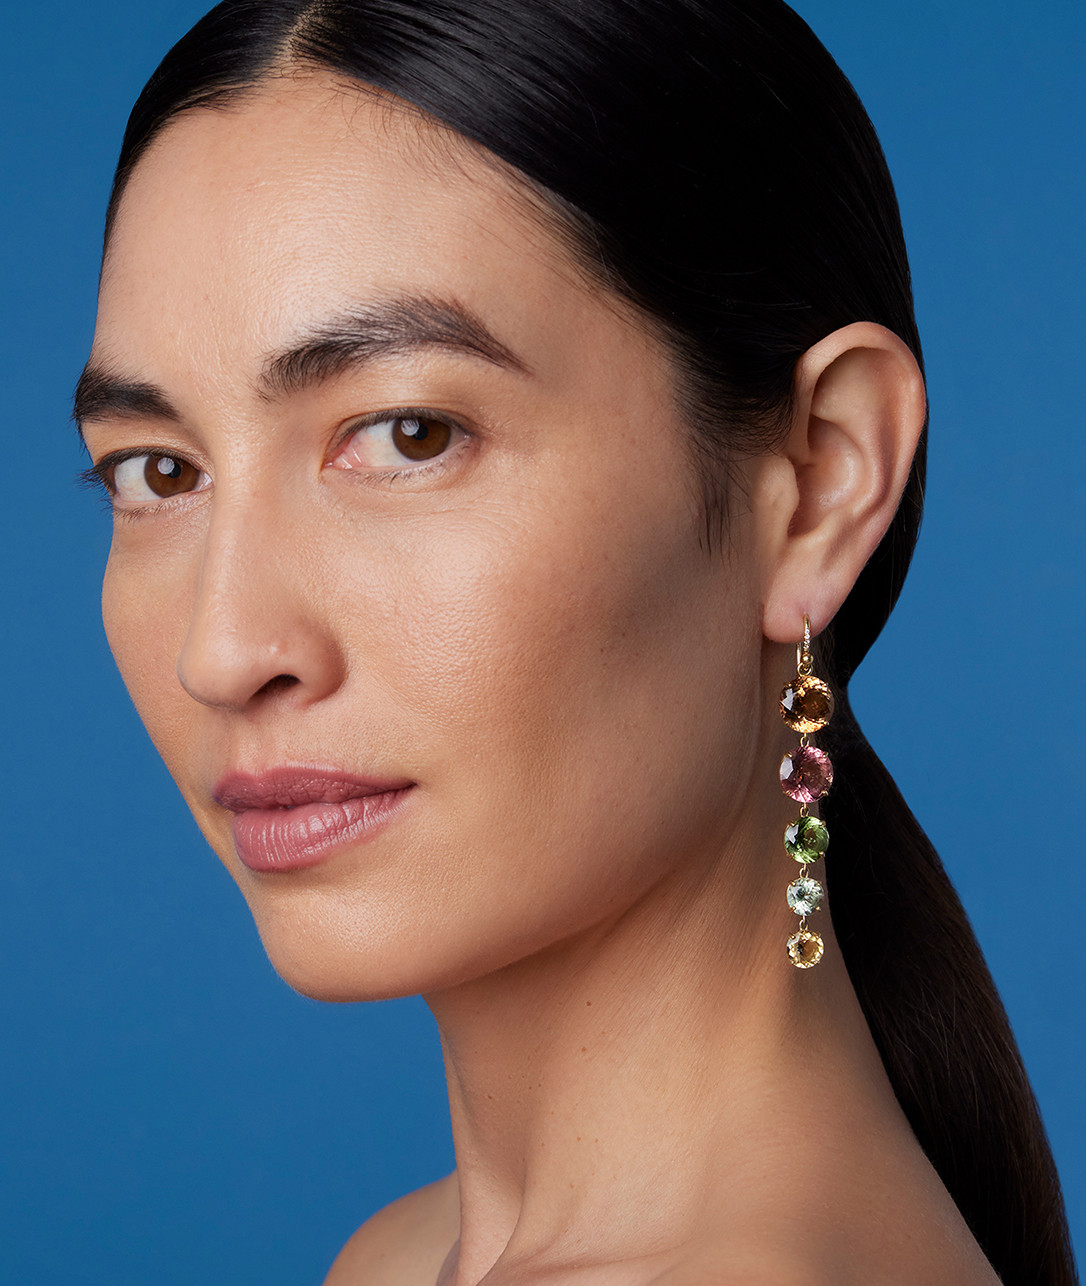 For Your Ears:
Let your statement drop earrings featuring watercolor-like ombrés of color do the talking.SHOP GEMMY GEM EARRINGS